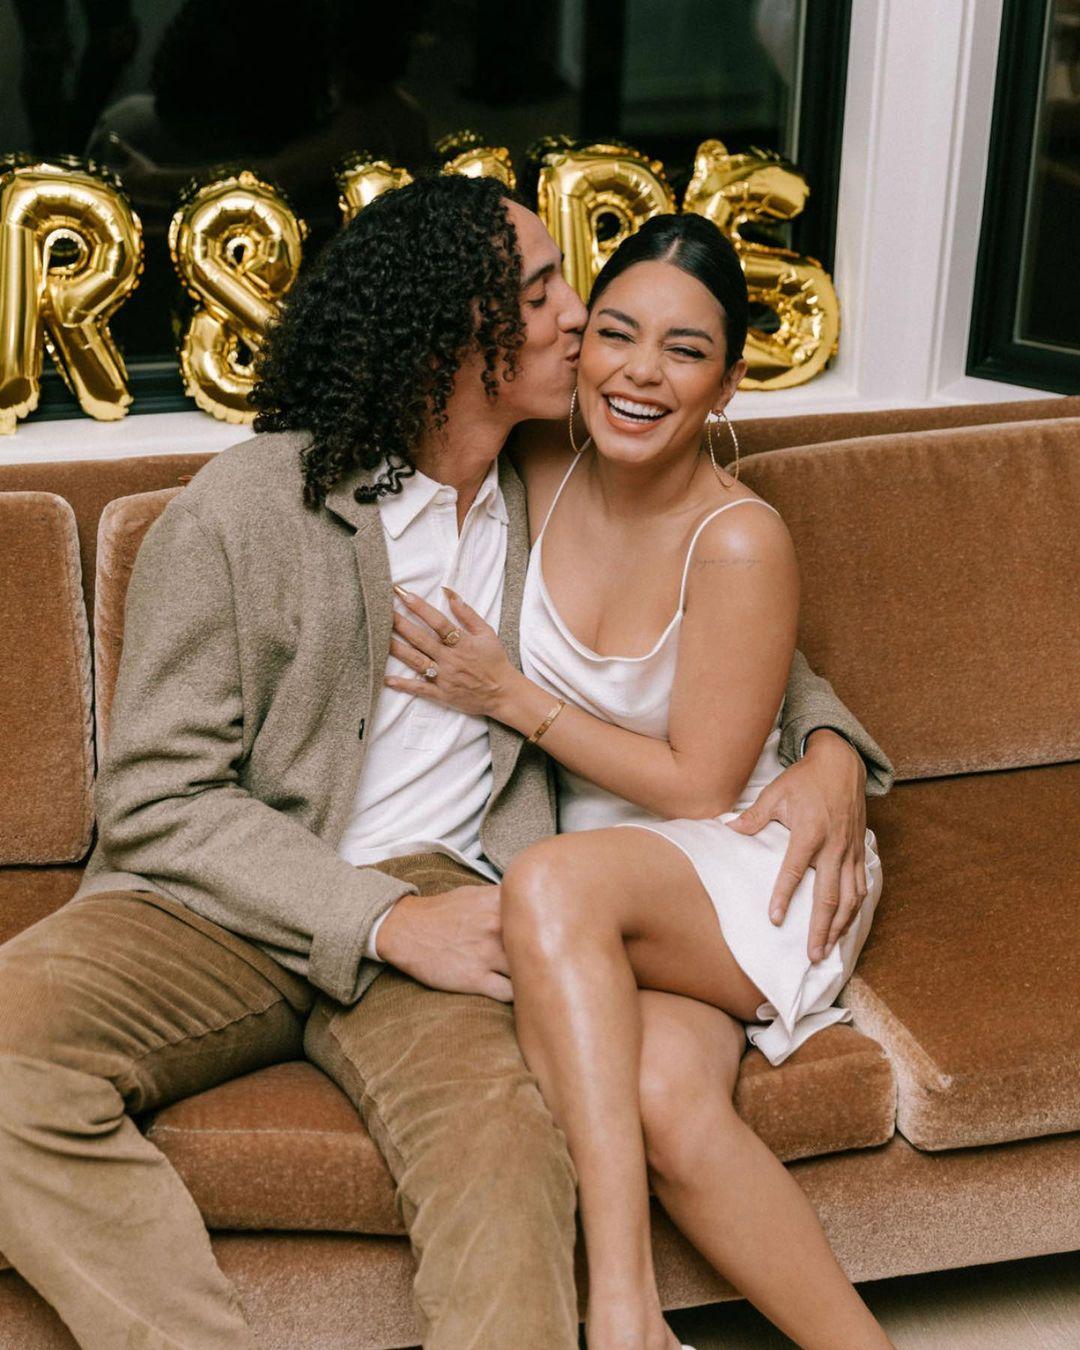 Vanessa Hudgens Reminisce Journey To Find 'My Forever' In Valentine's Day Post